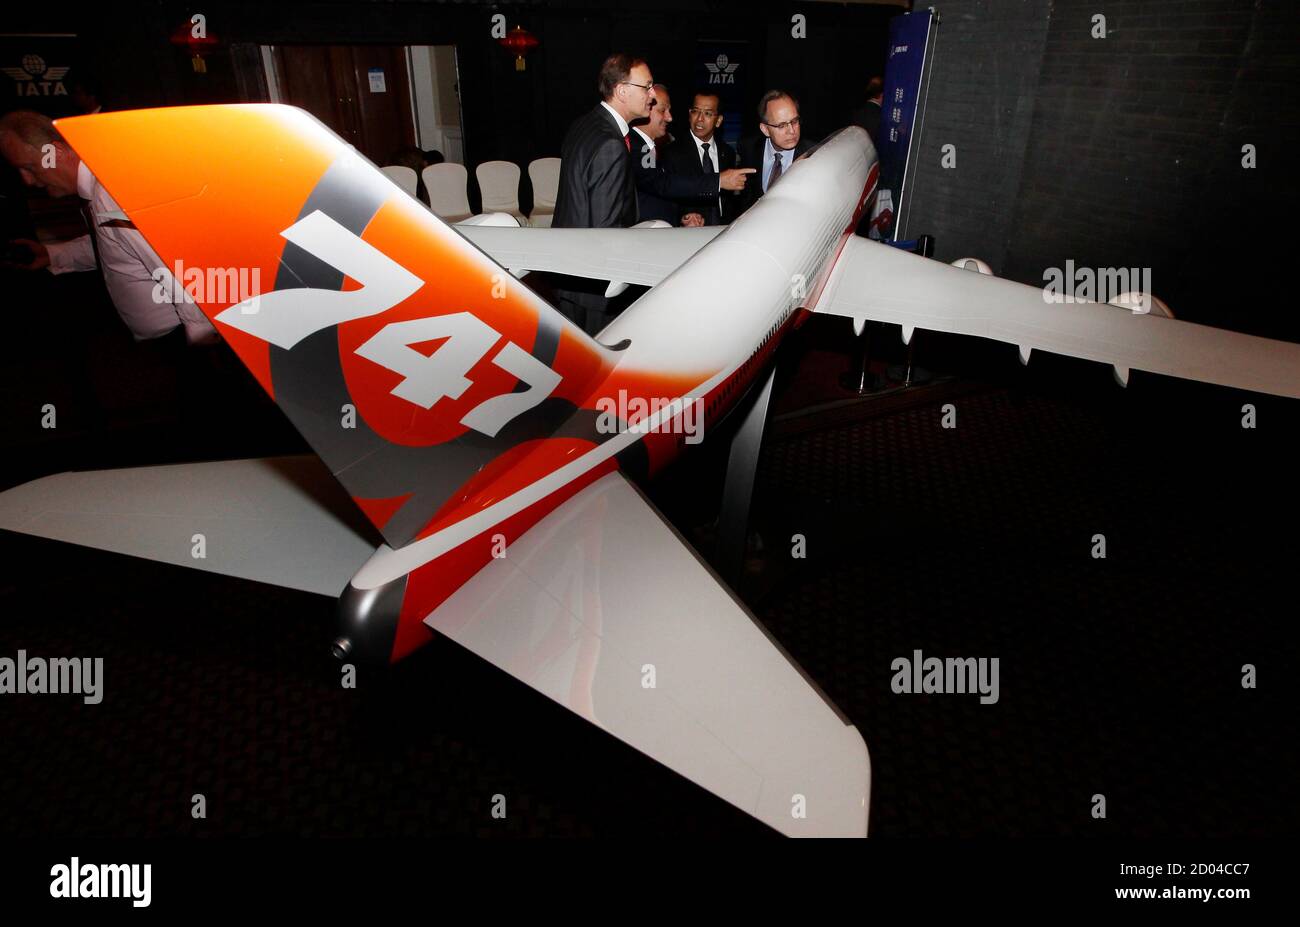 Delegates of the 68th International Air Transport Association (IATA) annual general meeting look at a model of new Boeing 747 aircraft, in Beijing June 10, 2012. Demand for premium seats on passenger jets is widely seen as a barometer of business confidence, while broader passenger traffic tracks broader trends in gross domestic product. Airlines from the 240-member International Air Transport Association (IATA) will be tackling growing regional disparities in demand amid Europe's financial turmoil as they gather for an annual meeting in Beijing this weekend. REUTERS/Jason Lee (CHINA - Tags: T Stock Photo